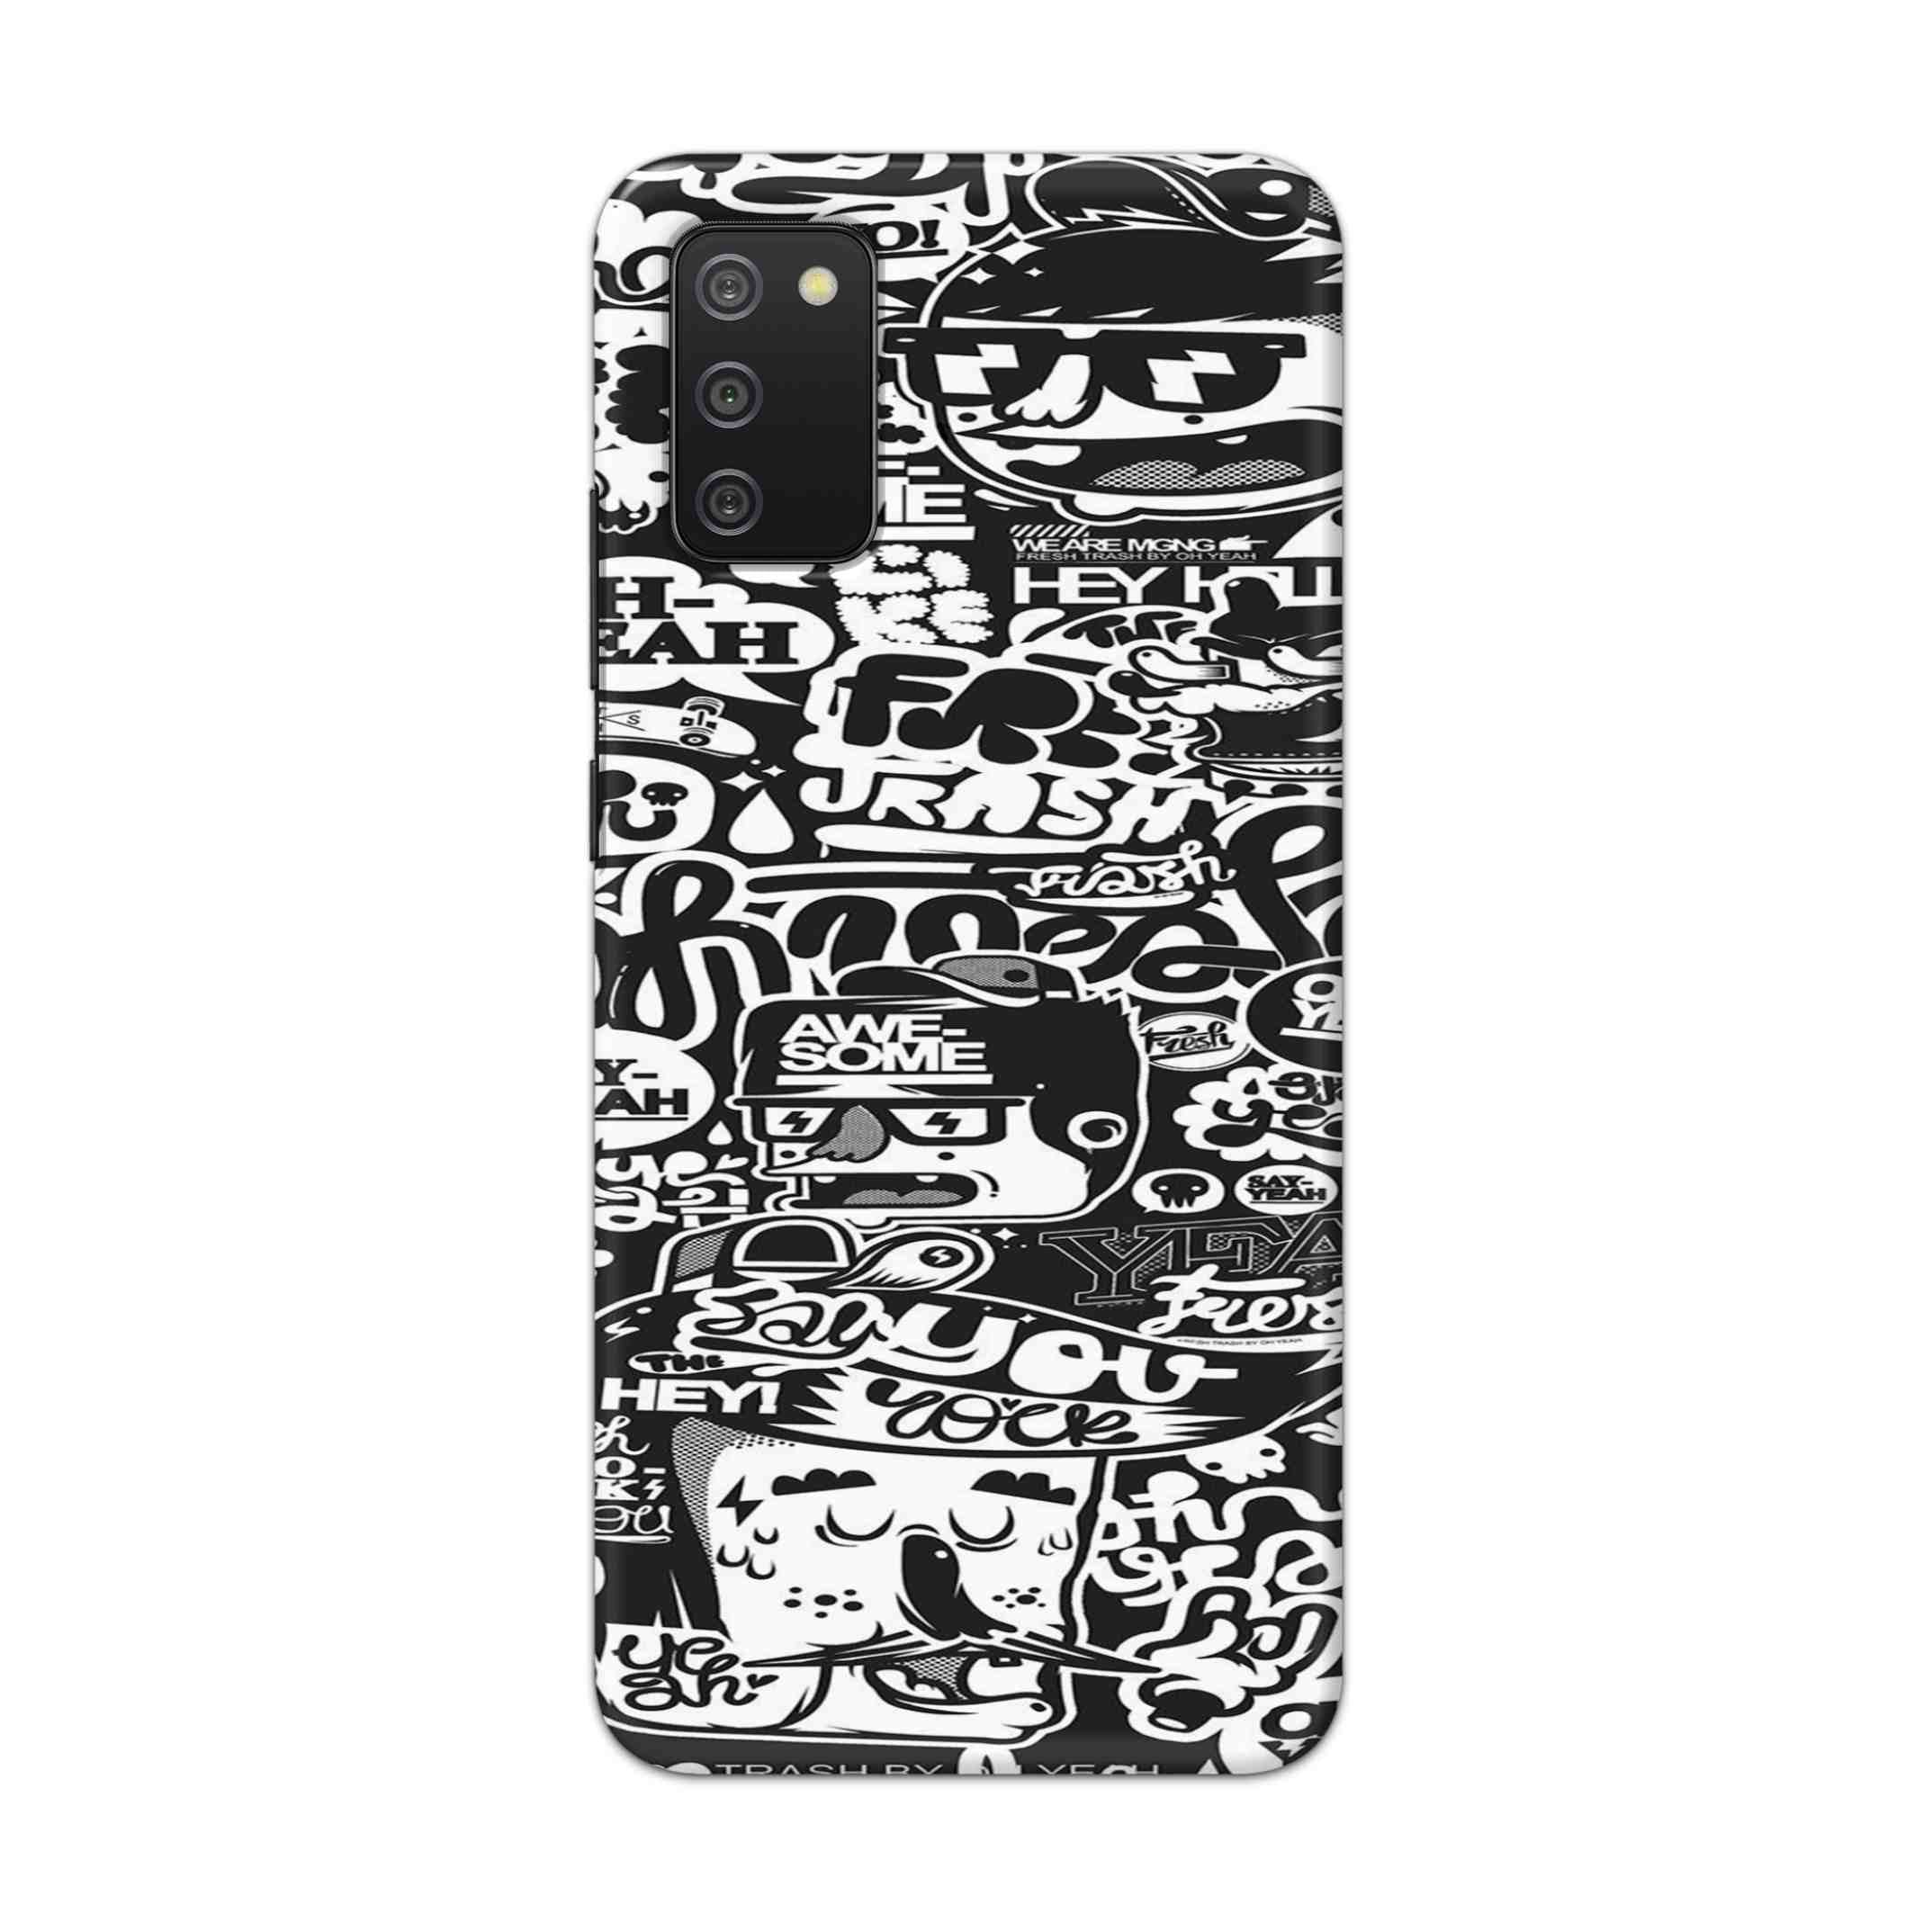 Buy Awesome Hard Back Mobile Phone Case Cover For Samsung Galaxy M02s Online